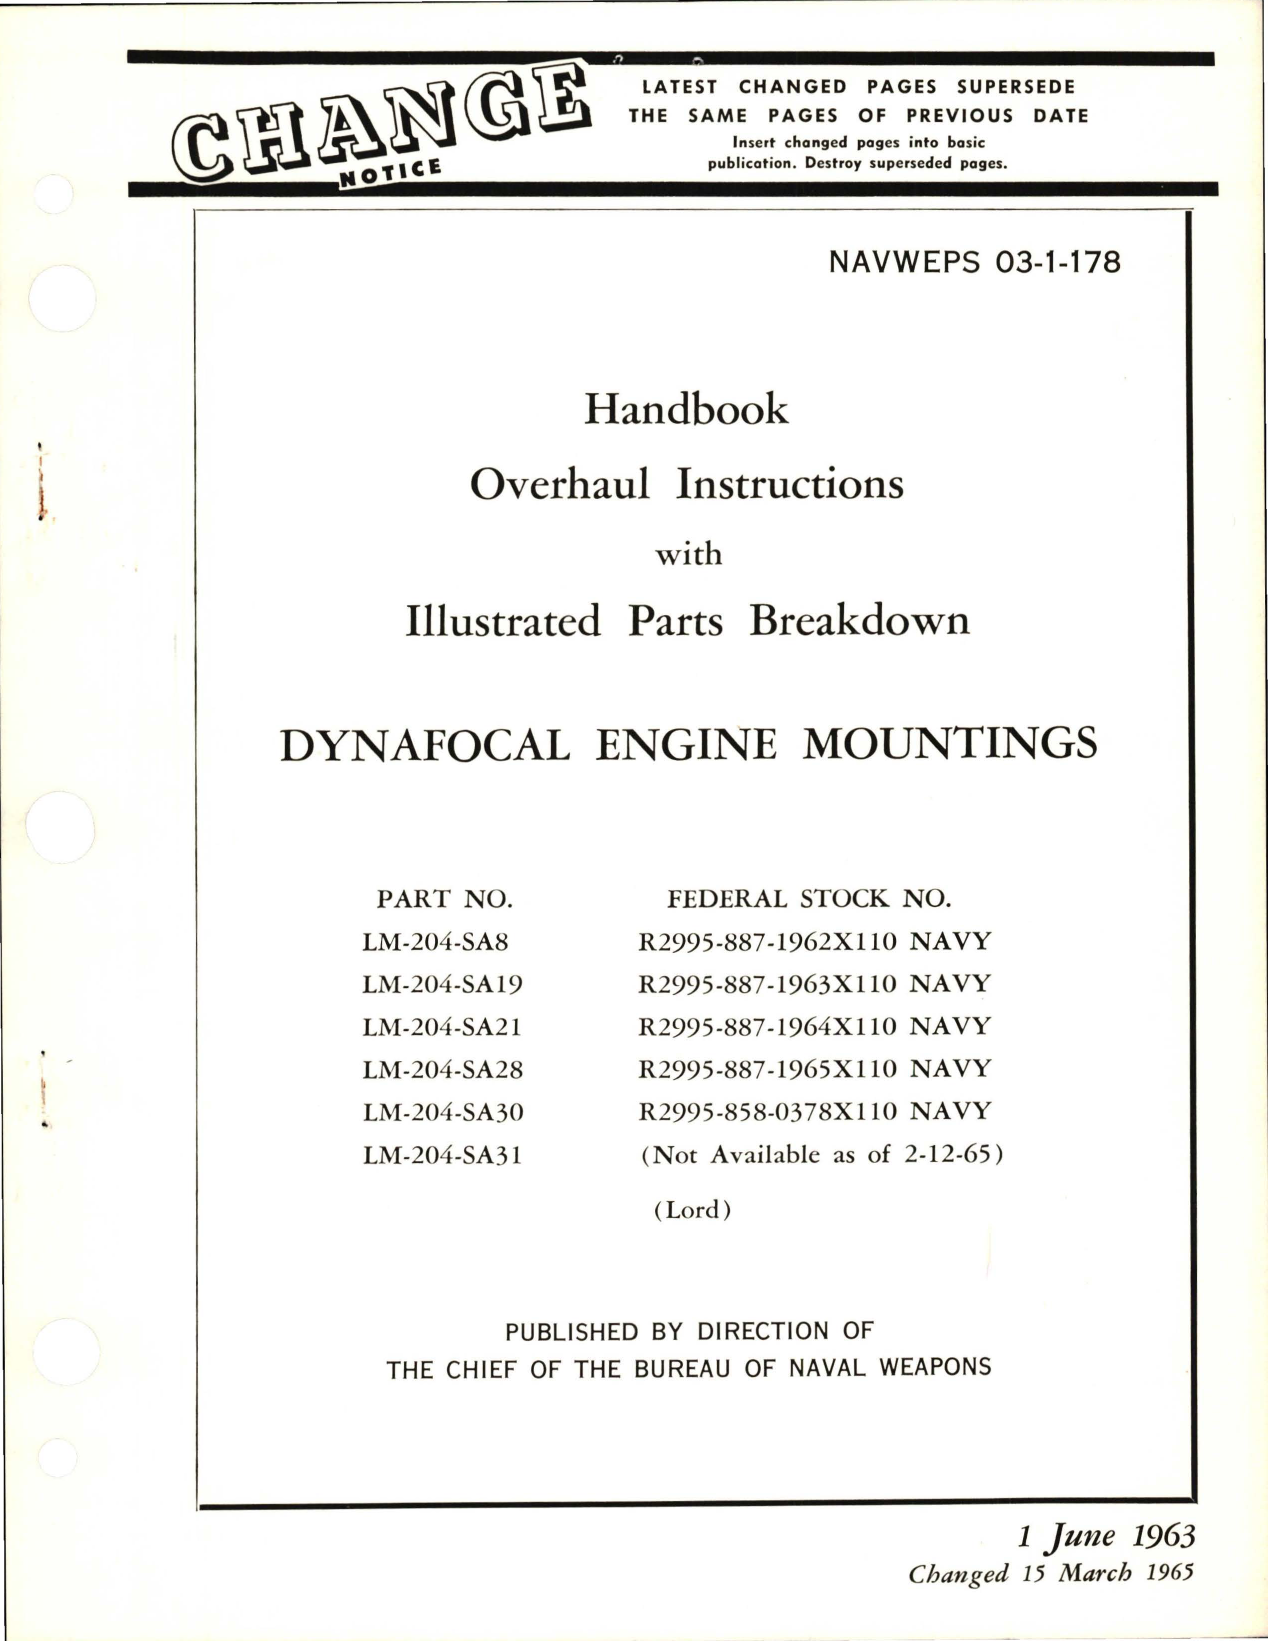 Sample page 1 from AirCorps Library document: Overhaul Instructions with Illustrated Parts Breakdown for Dynafocal Engine Mountings 